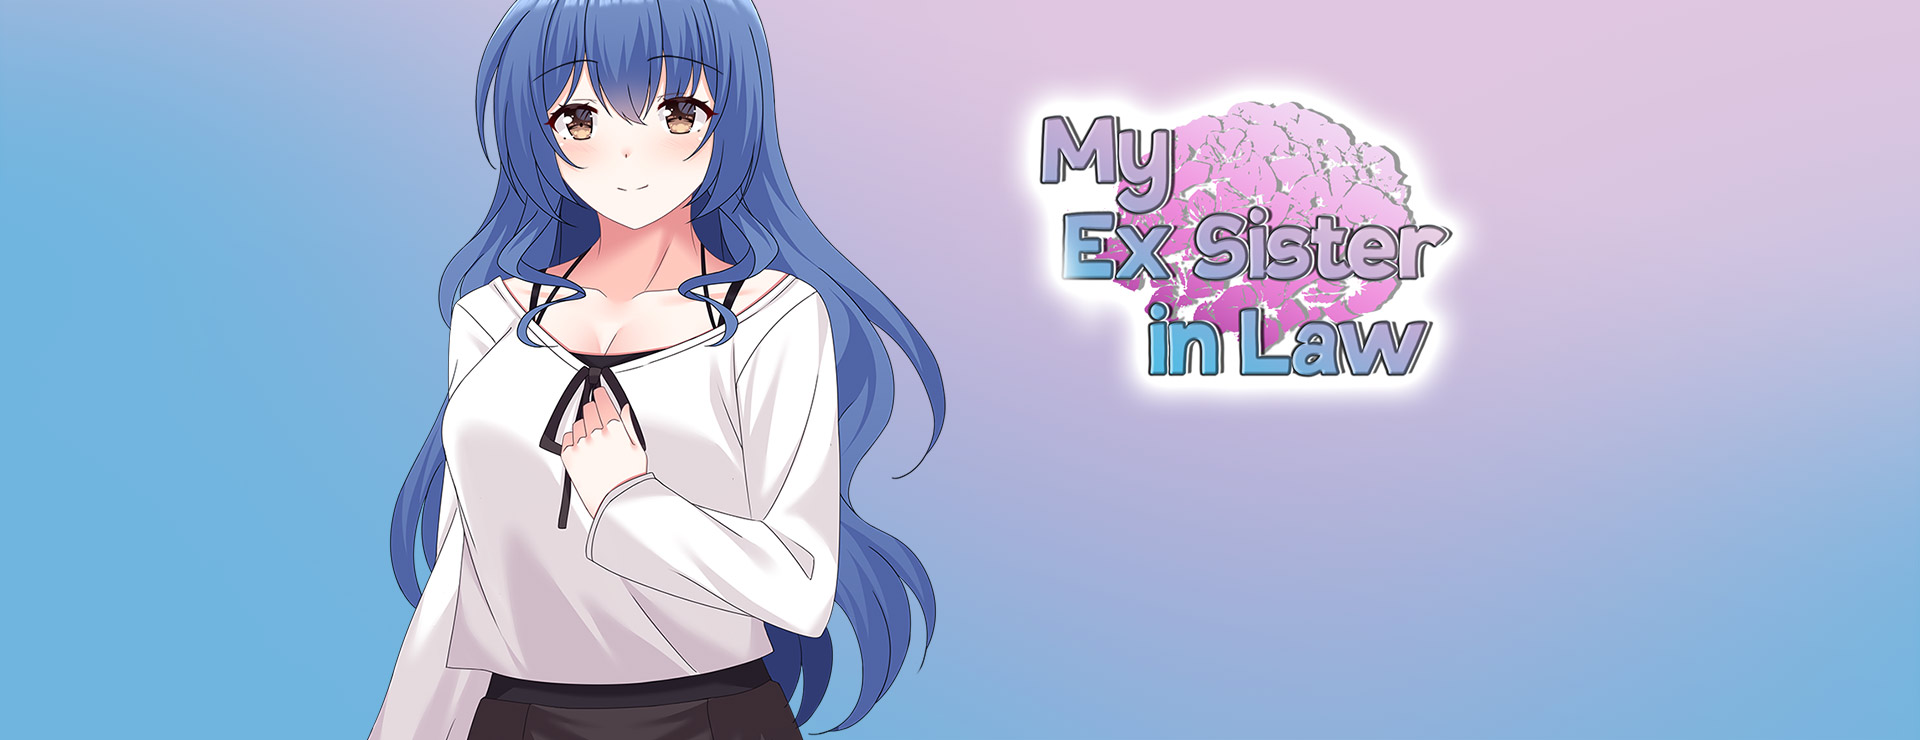 My Ex Sister In Law - Visual Novel Game